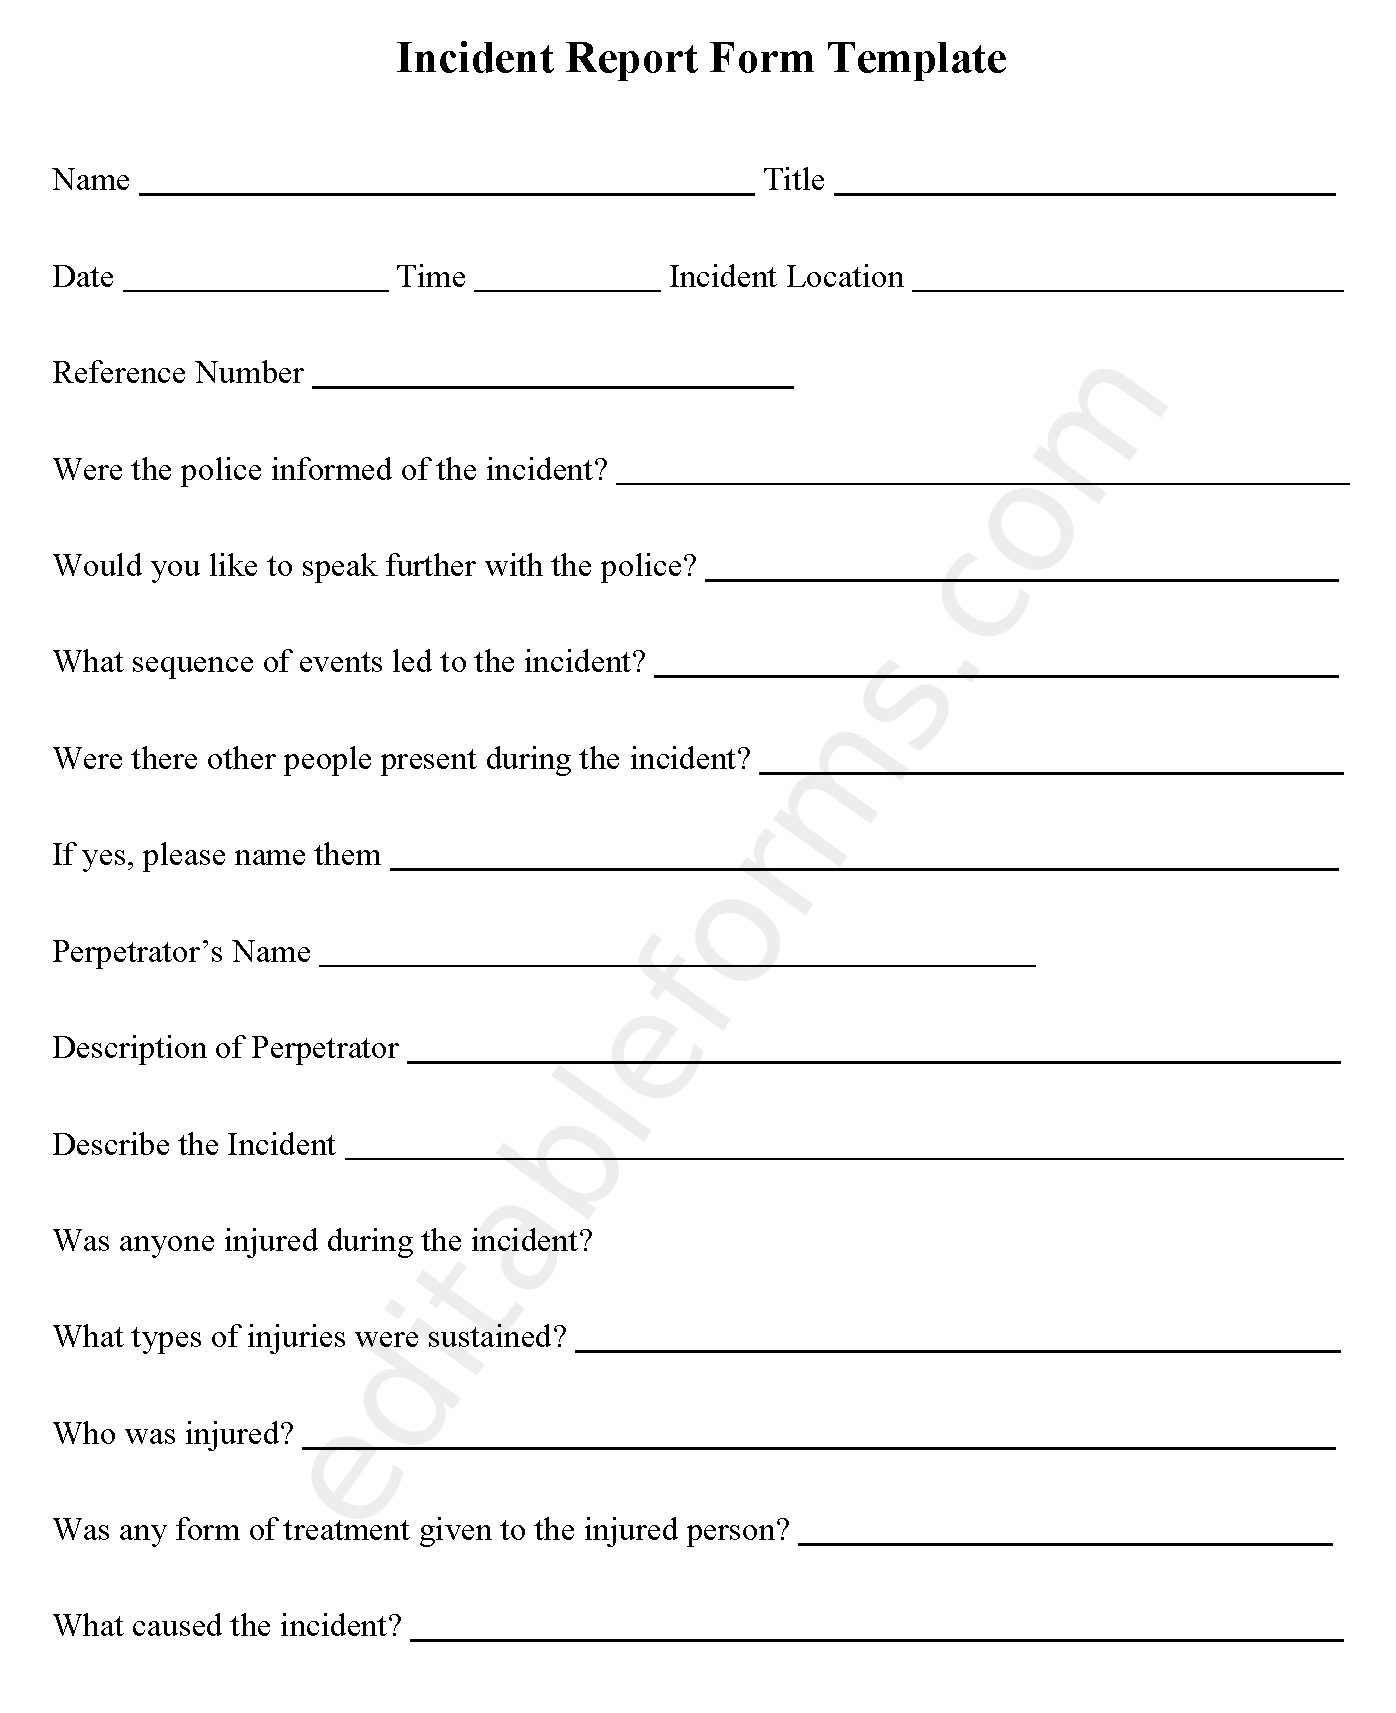 Incident Report Fillable PDF Template